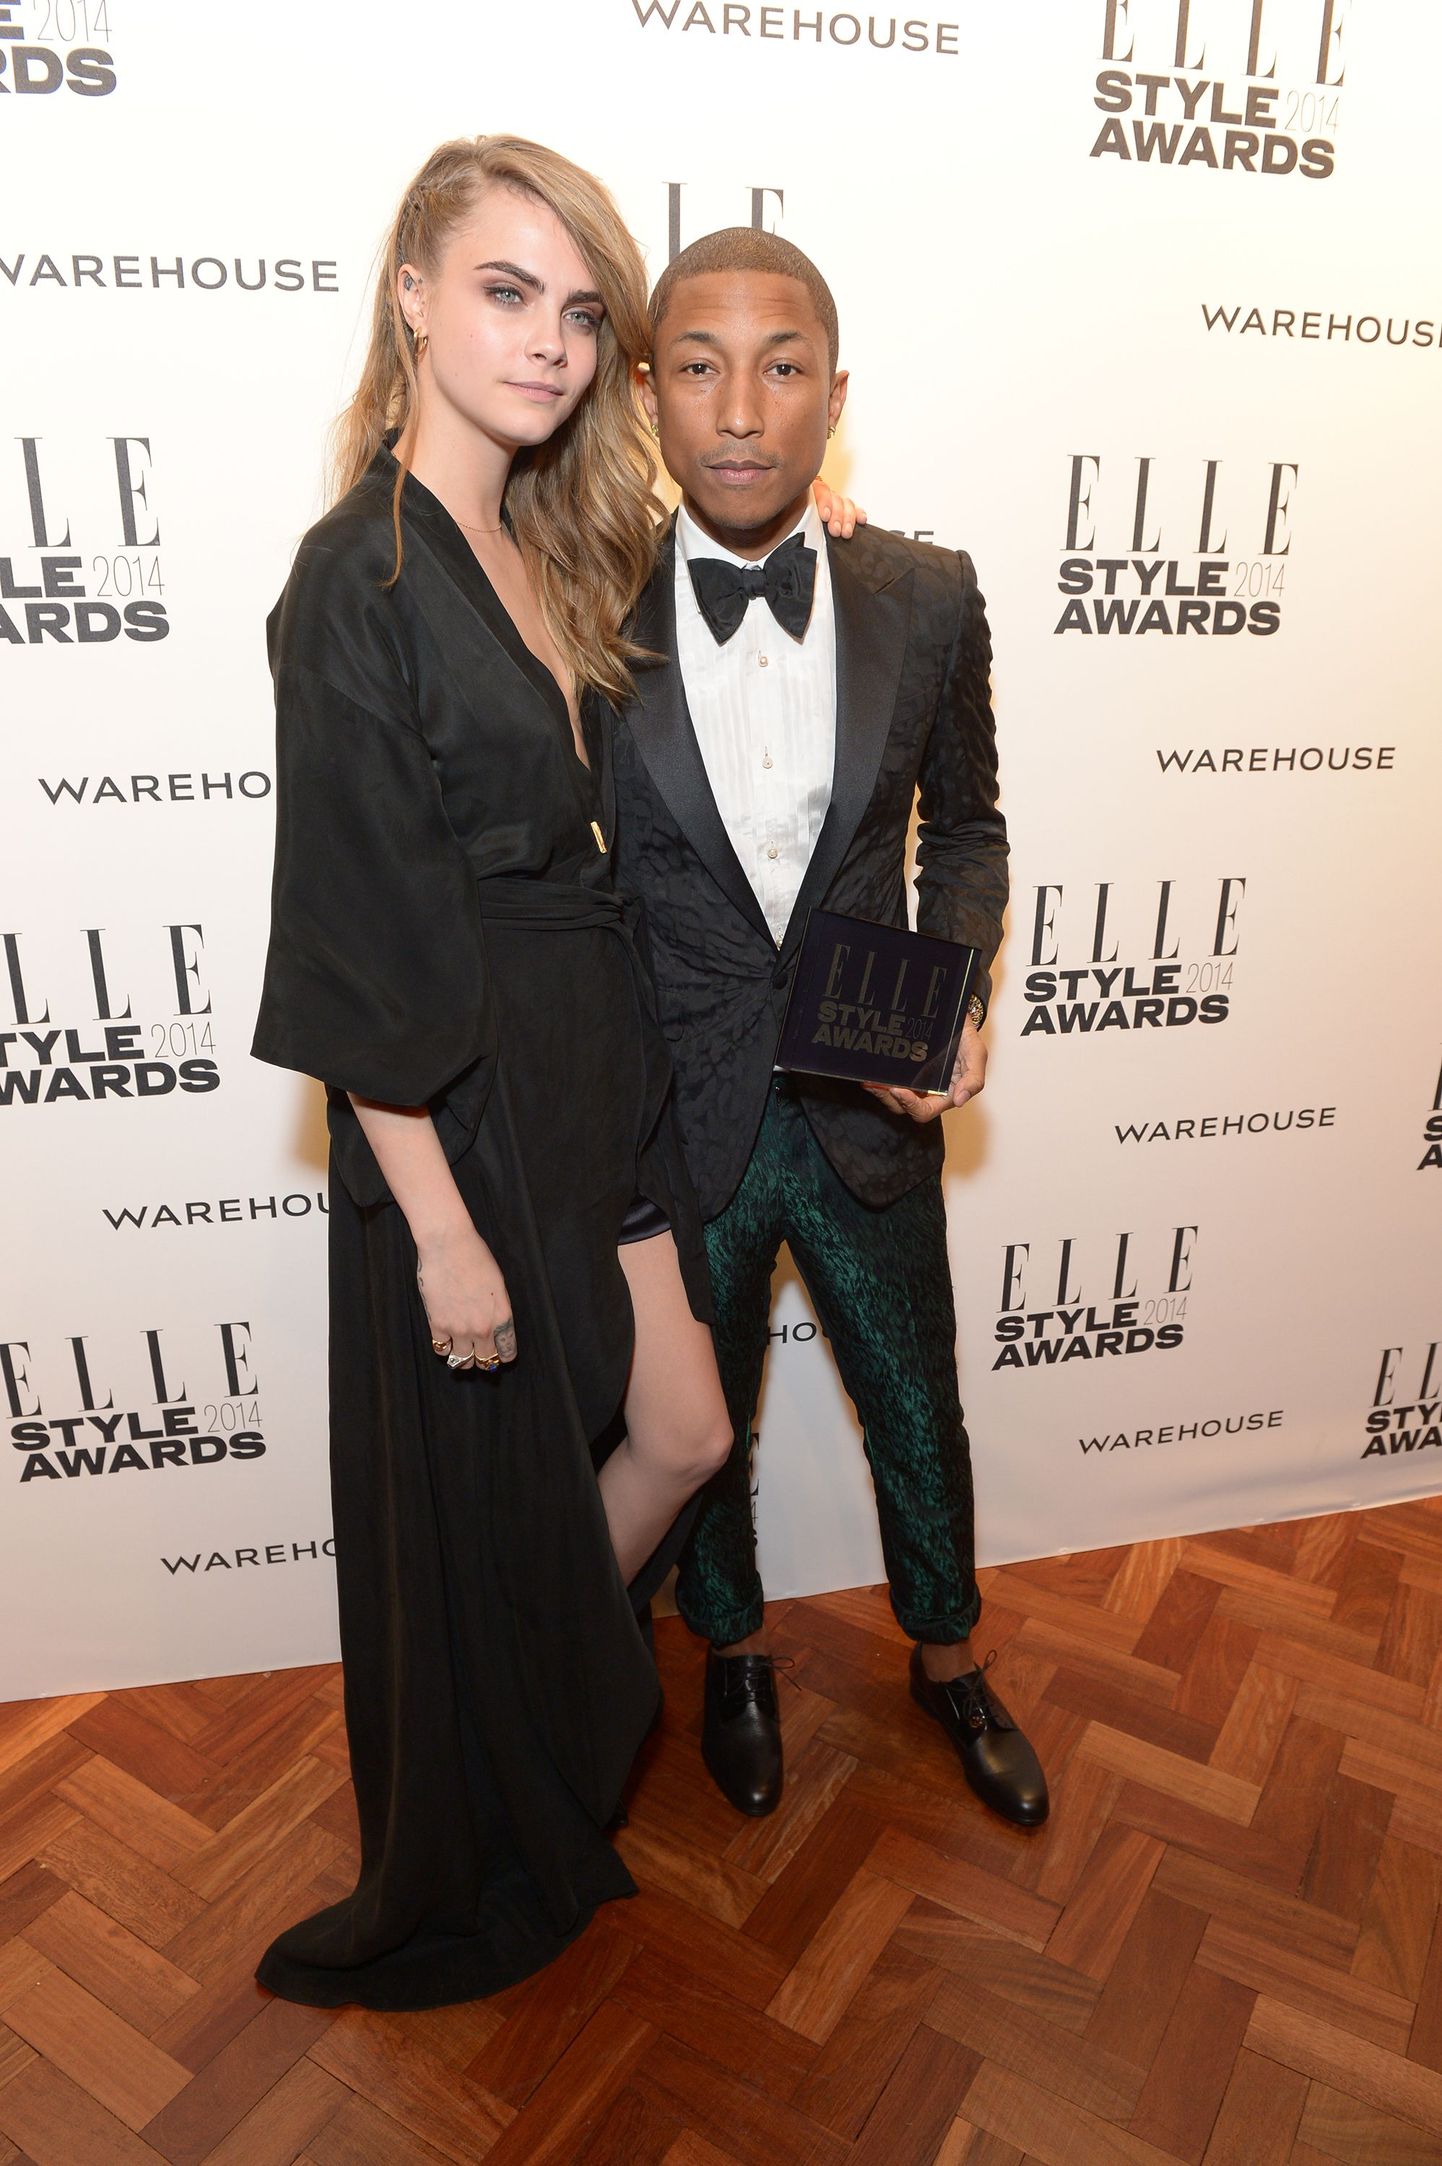 British model Cara Delevingne, left, poses for photographers with winner of the International Recording Artist of the Year award Pharrell Williams at the ELLE Style Awards 2014 held at One Embankment on Tuesday Feb. 18, 2014, in London. (photos by Jon Furniss/Invision/AP) / TT / kod 436